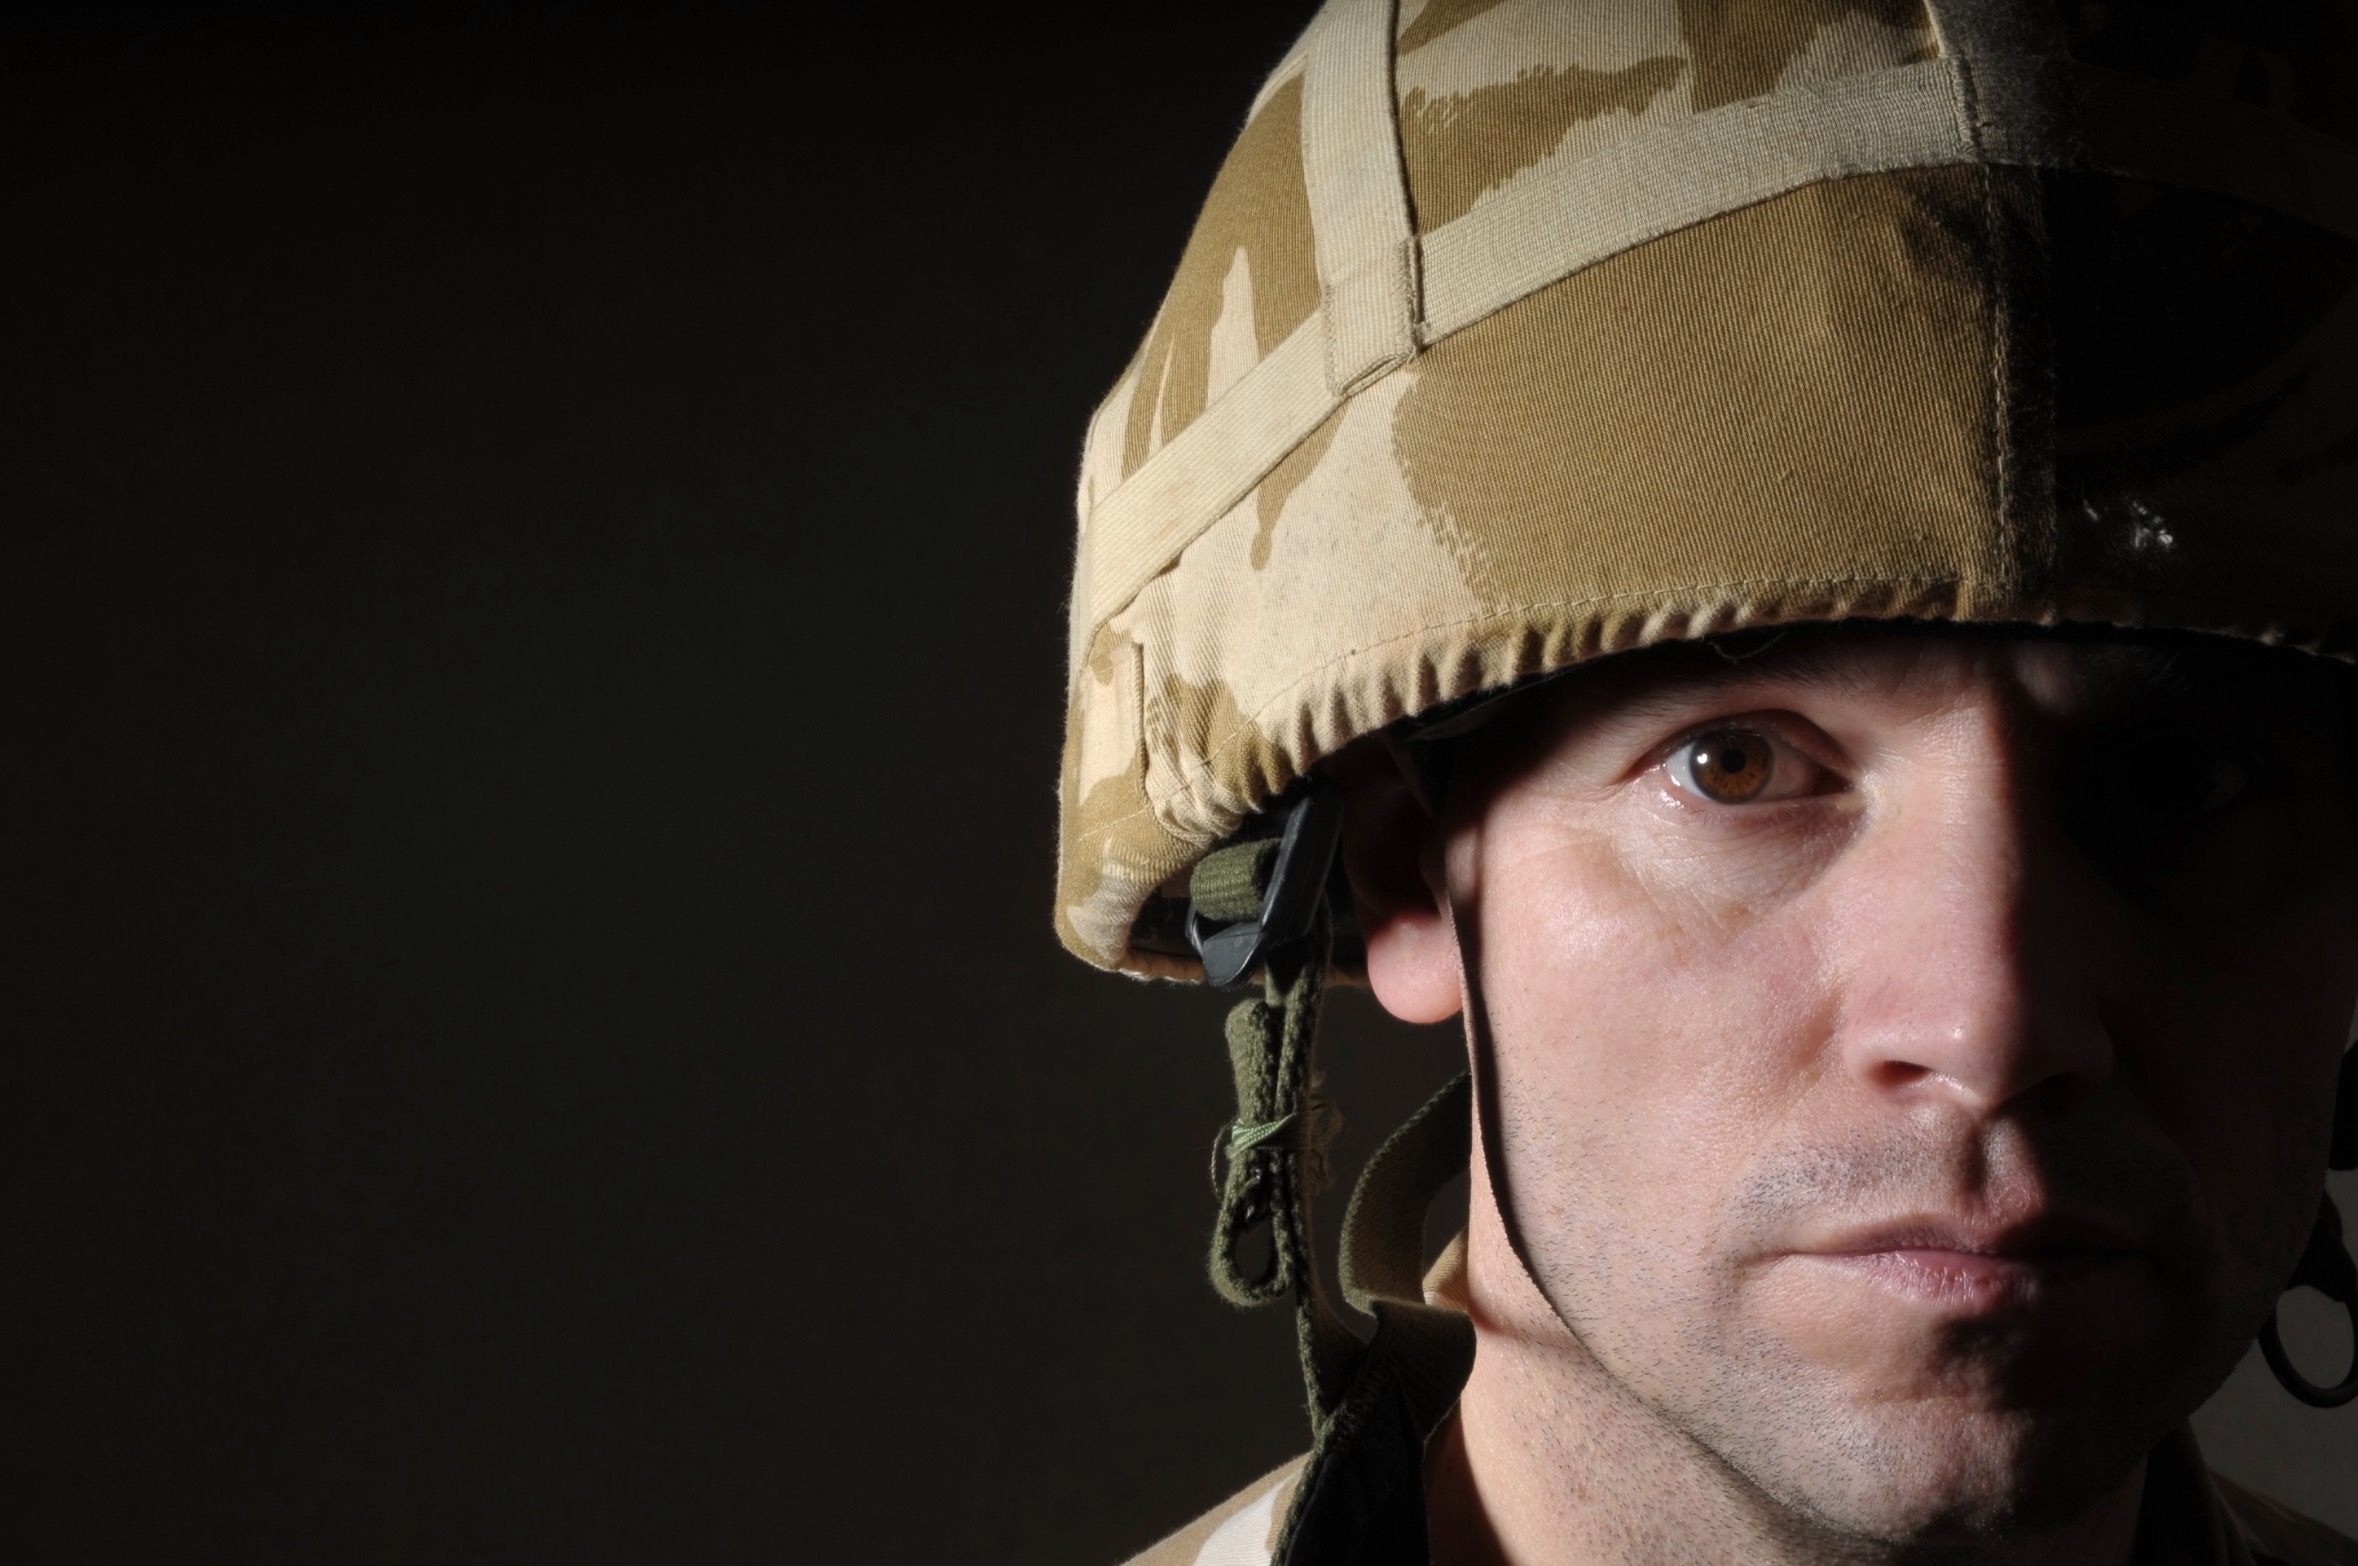 PTSD Soldier With Half Face In Shadow. Photo by John Gomez on Shutterstock